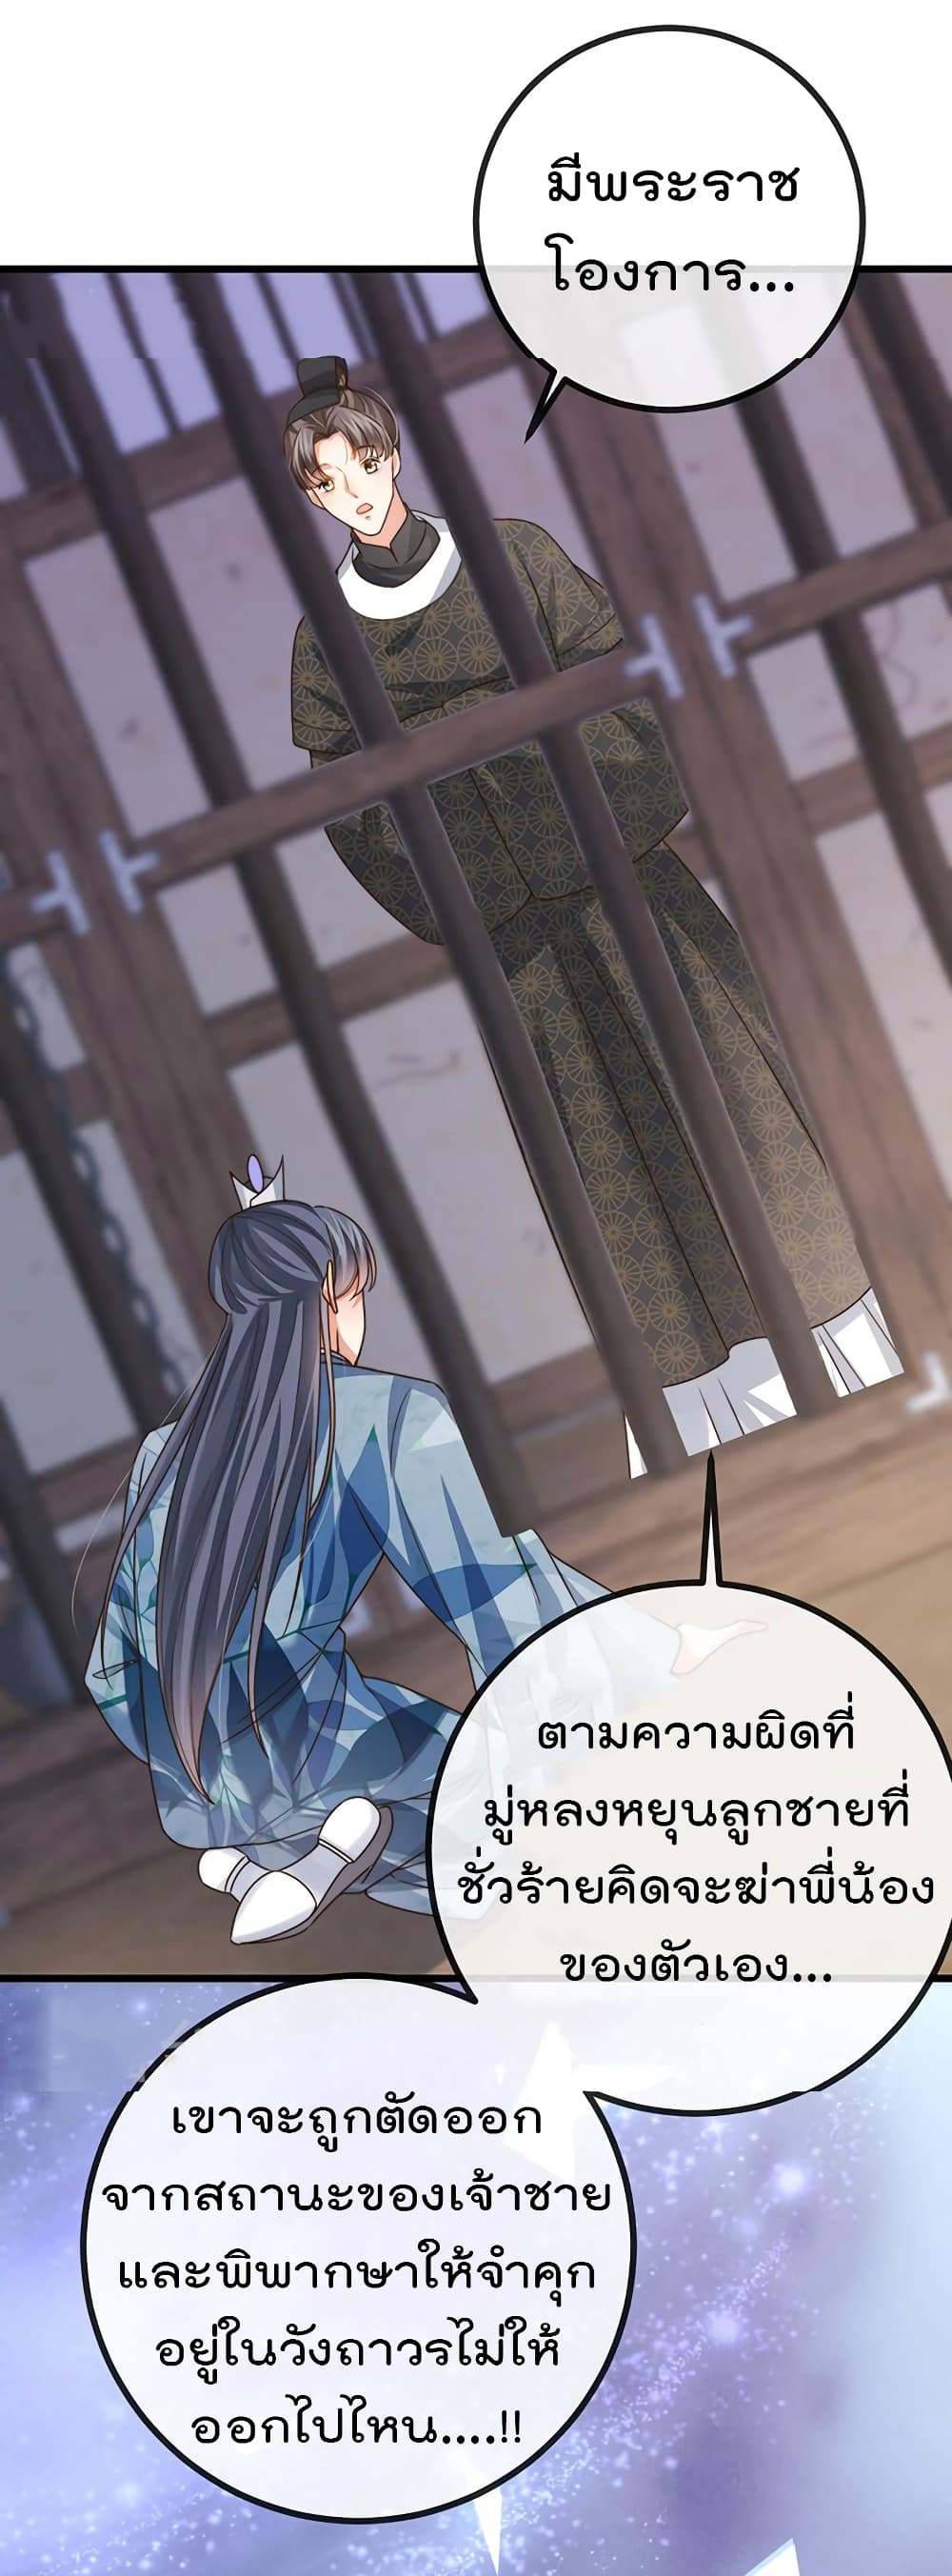 One Hundred Ways to Abuse Scum ตอนที่ 62